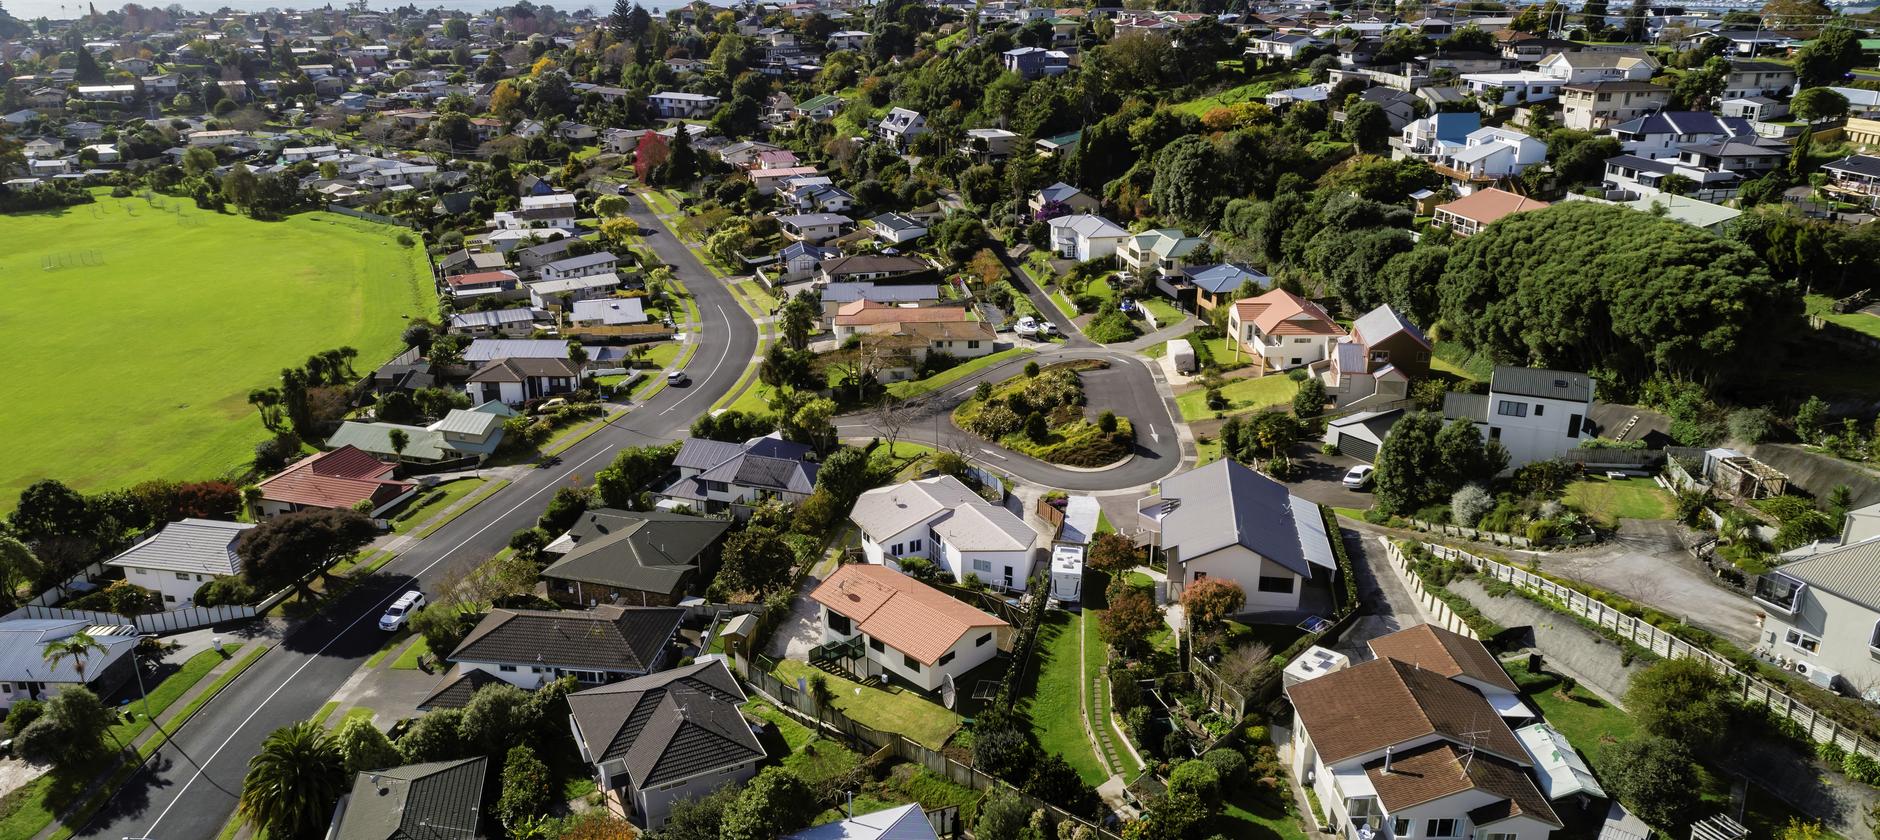 Kiwis still spending half of household income on mortgage repayments